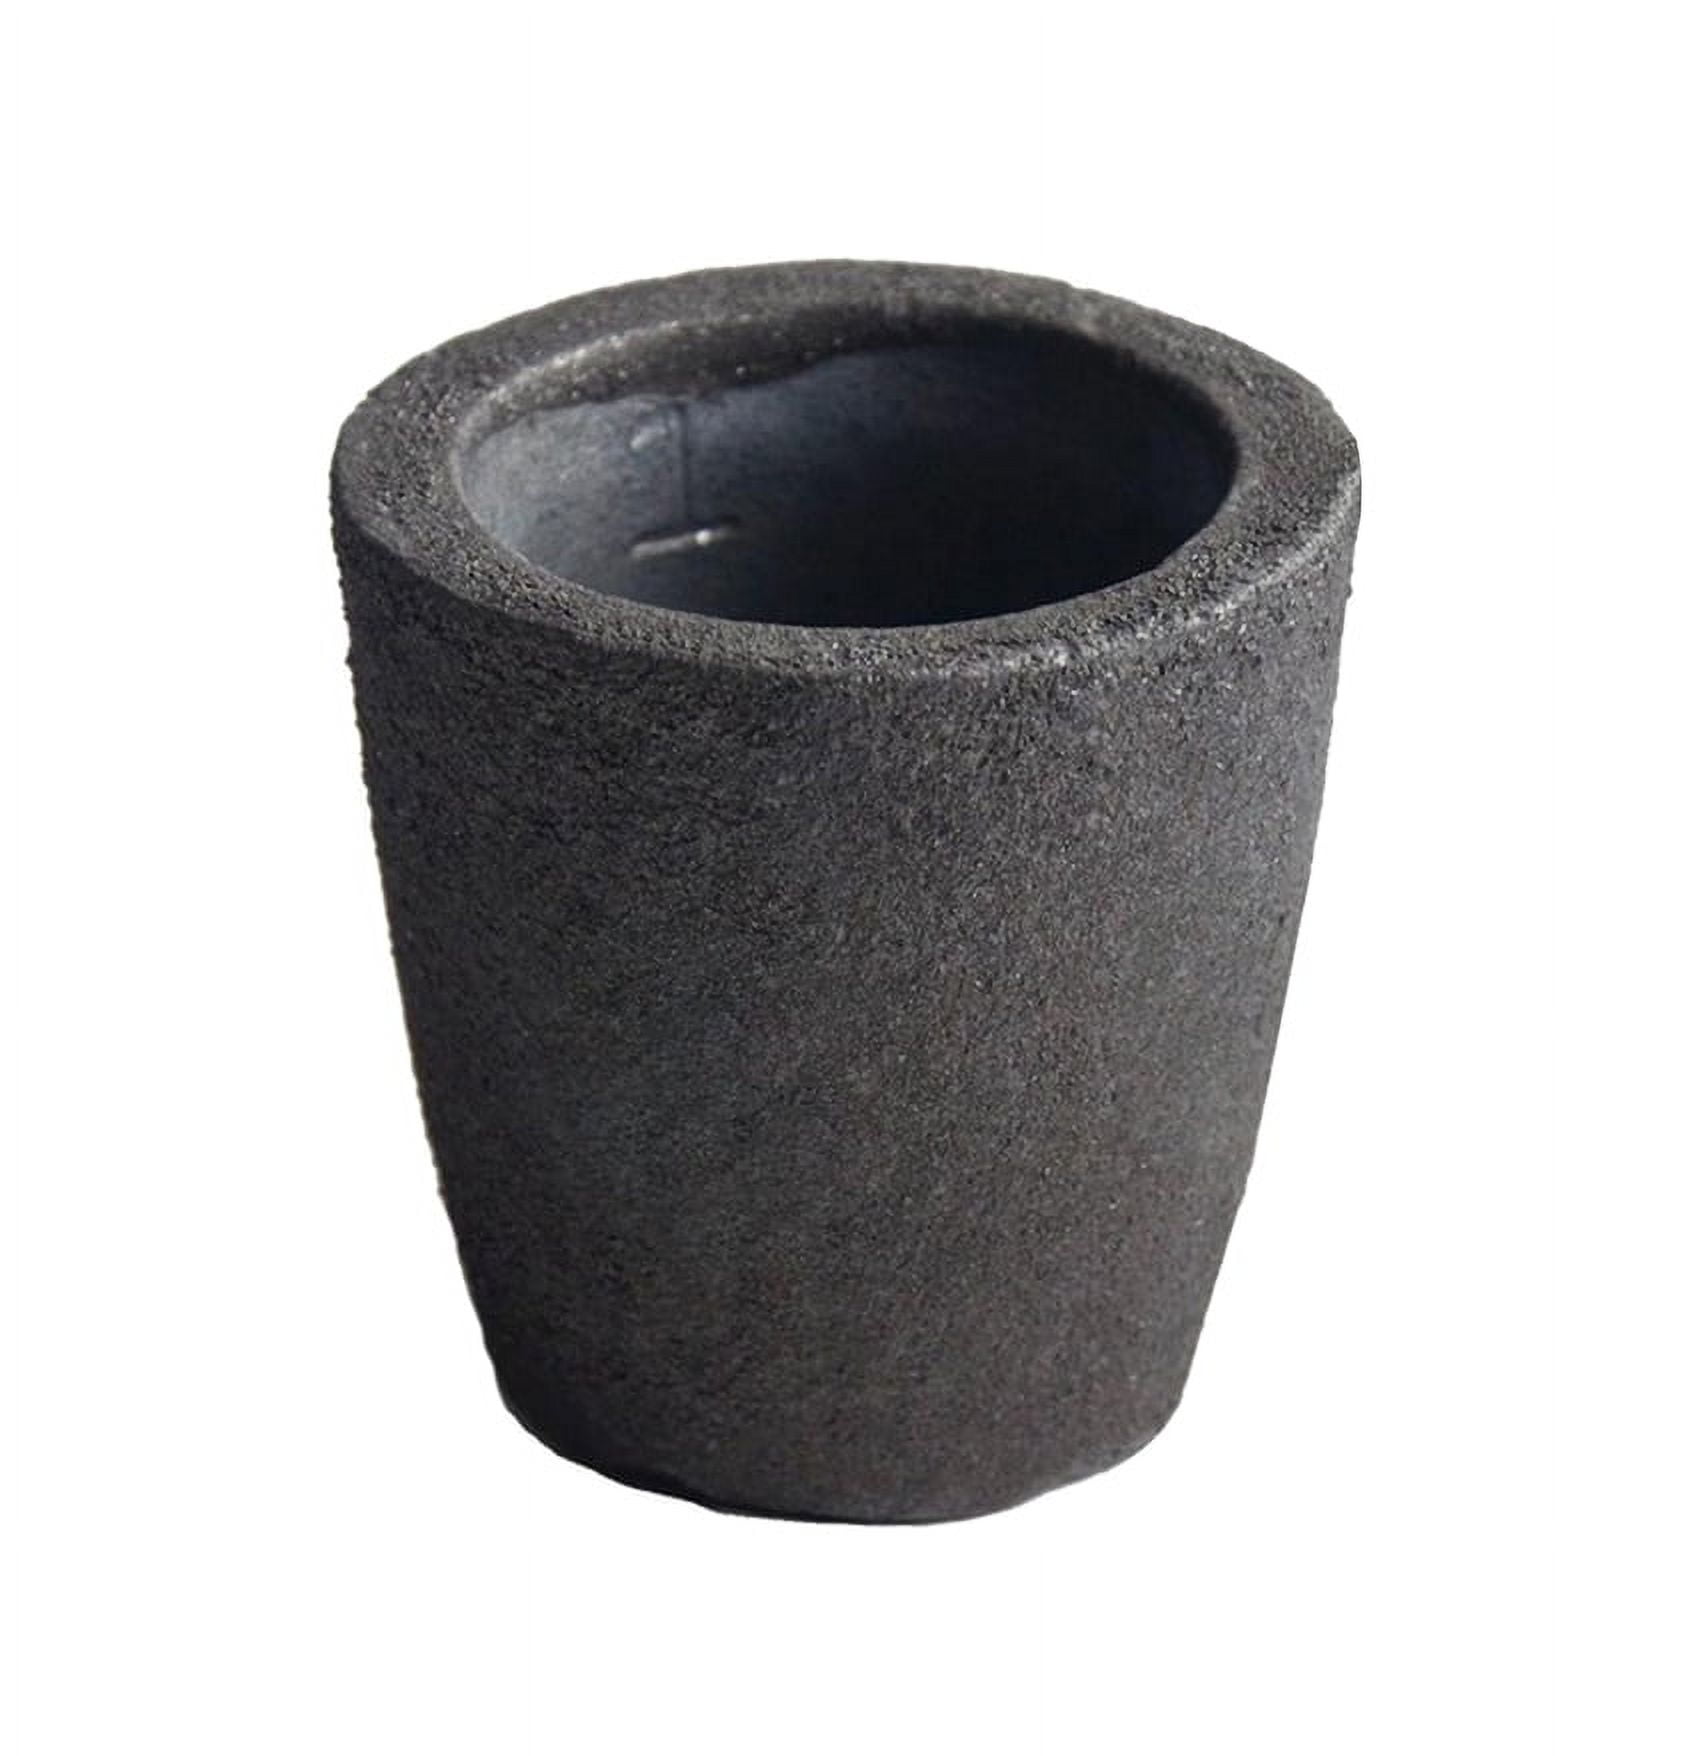 GongYi #0 (1.1lbs-0.5kg) Clay Graphite Crucible for Metal Melting Casting  Refining Gold Silver Copper Brass Aluminum